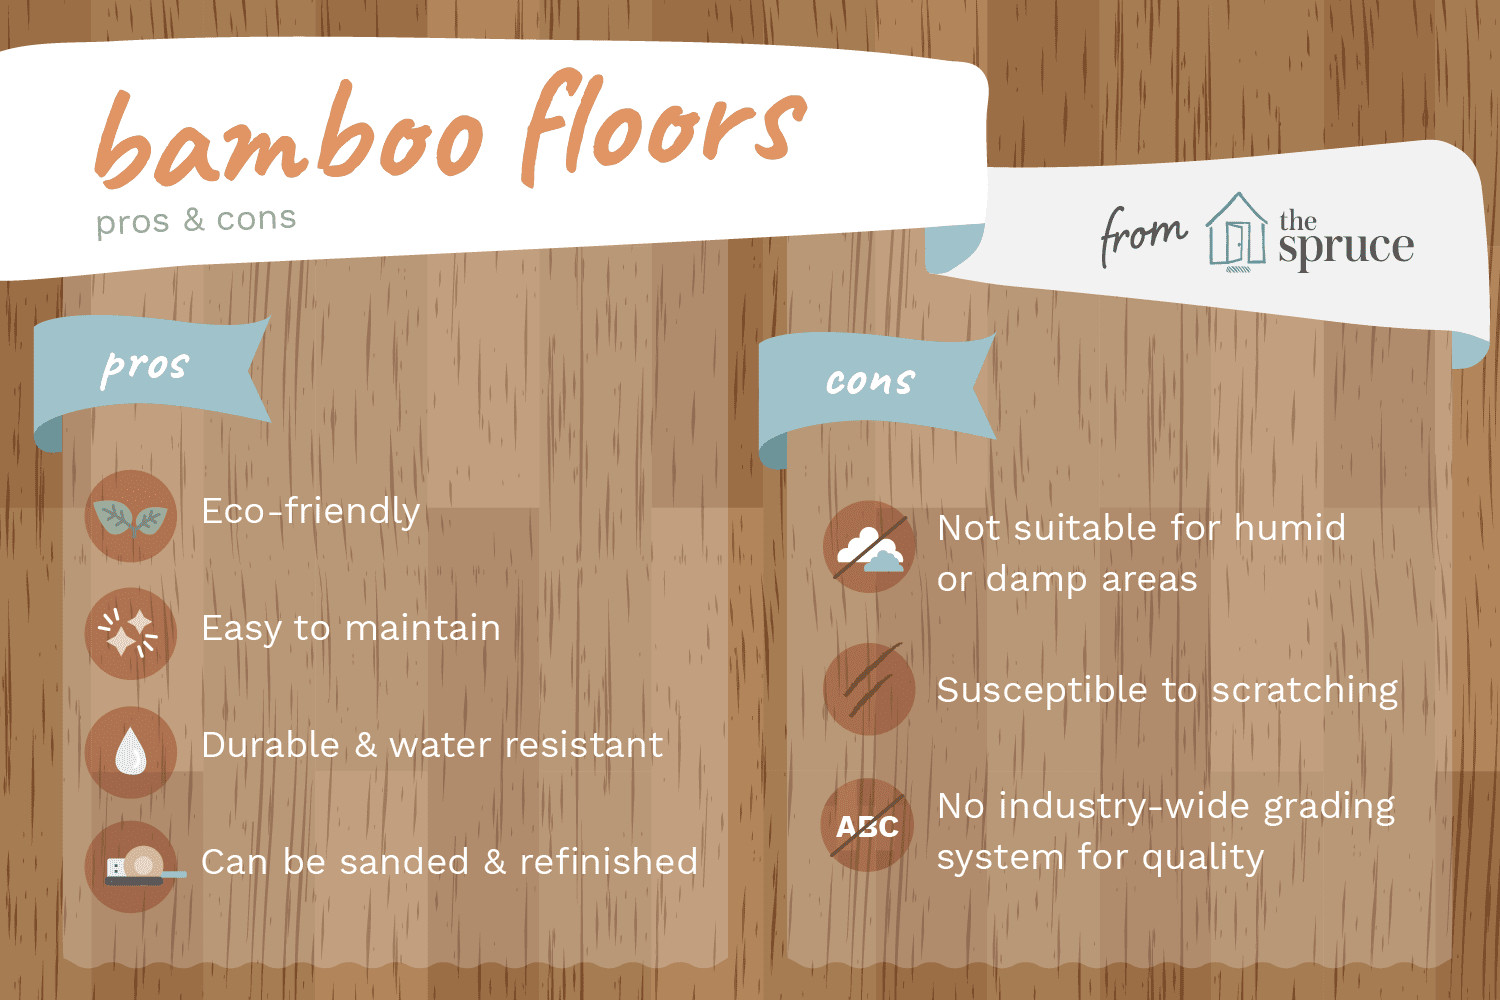 19 Fashionable ash Hardwood Flooring Pros and Cons 2023 free download ash hardwood flooring pros and cons of the advantages and disadvantages of bamboo flooring in benefits and drawbacks of bamboo floors 1314694 v3 5b102fccff1b780036c0a4fa